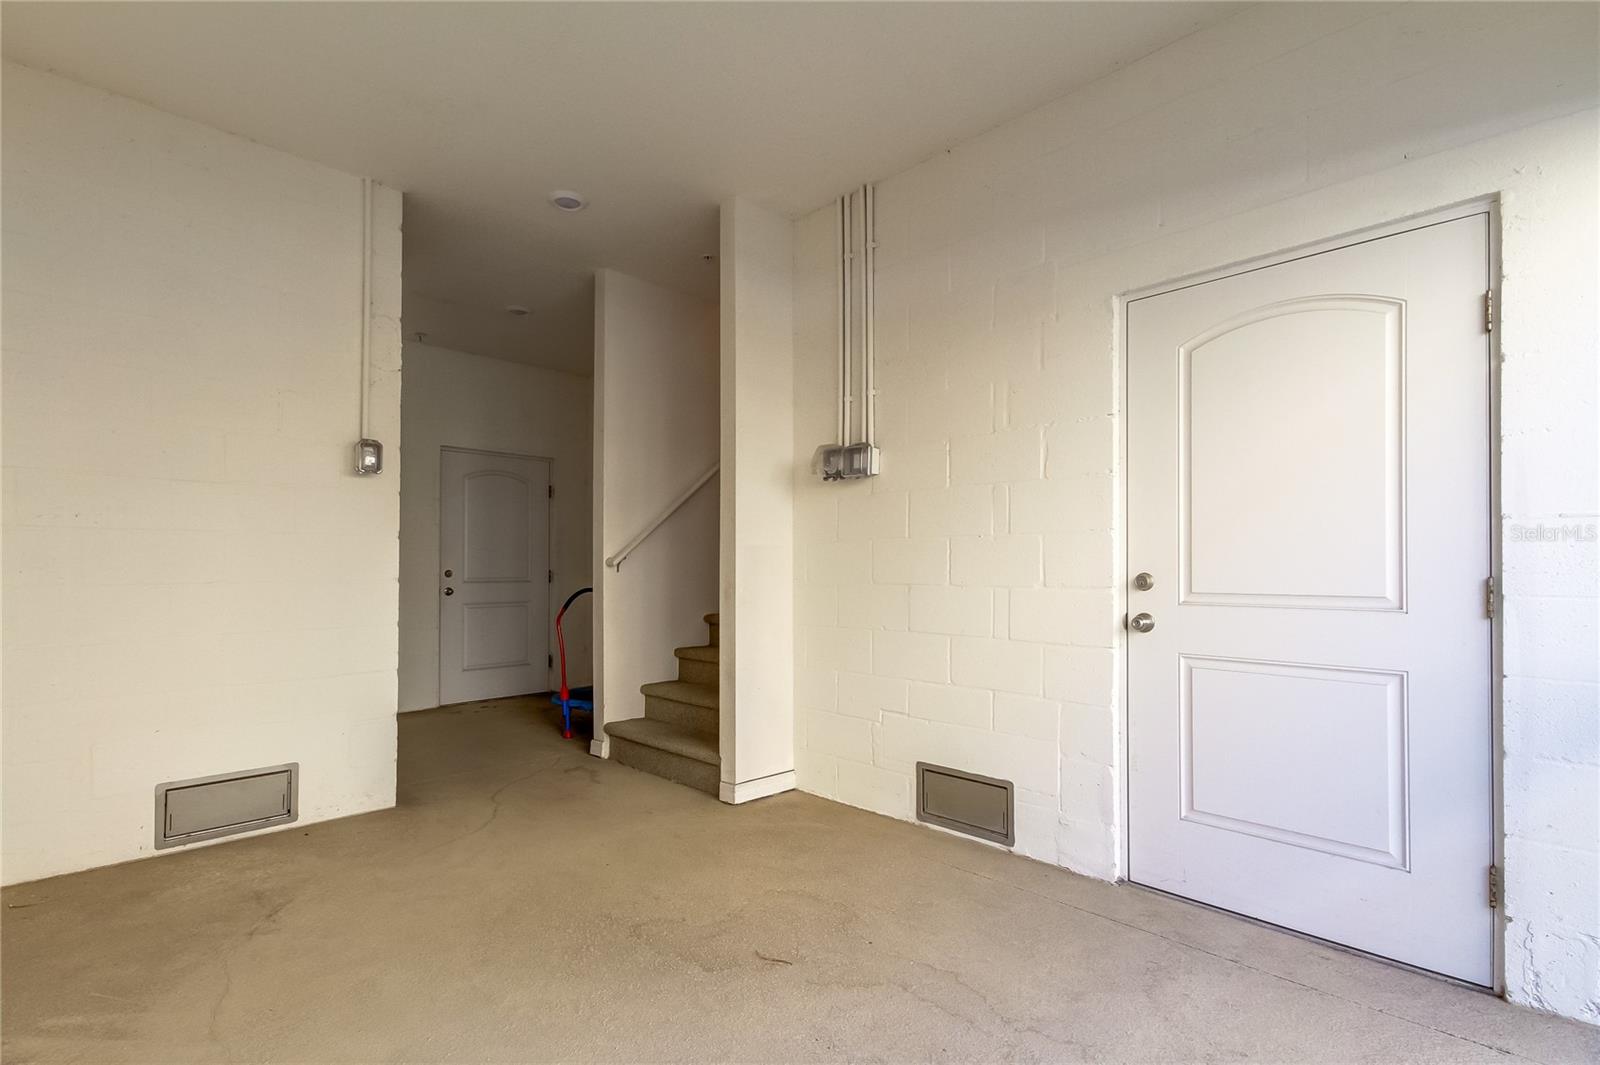 1st floor - Area where the 2 Storage Closets, Door leading to garage & Water Softener closet is located